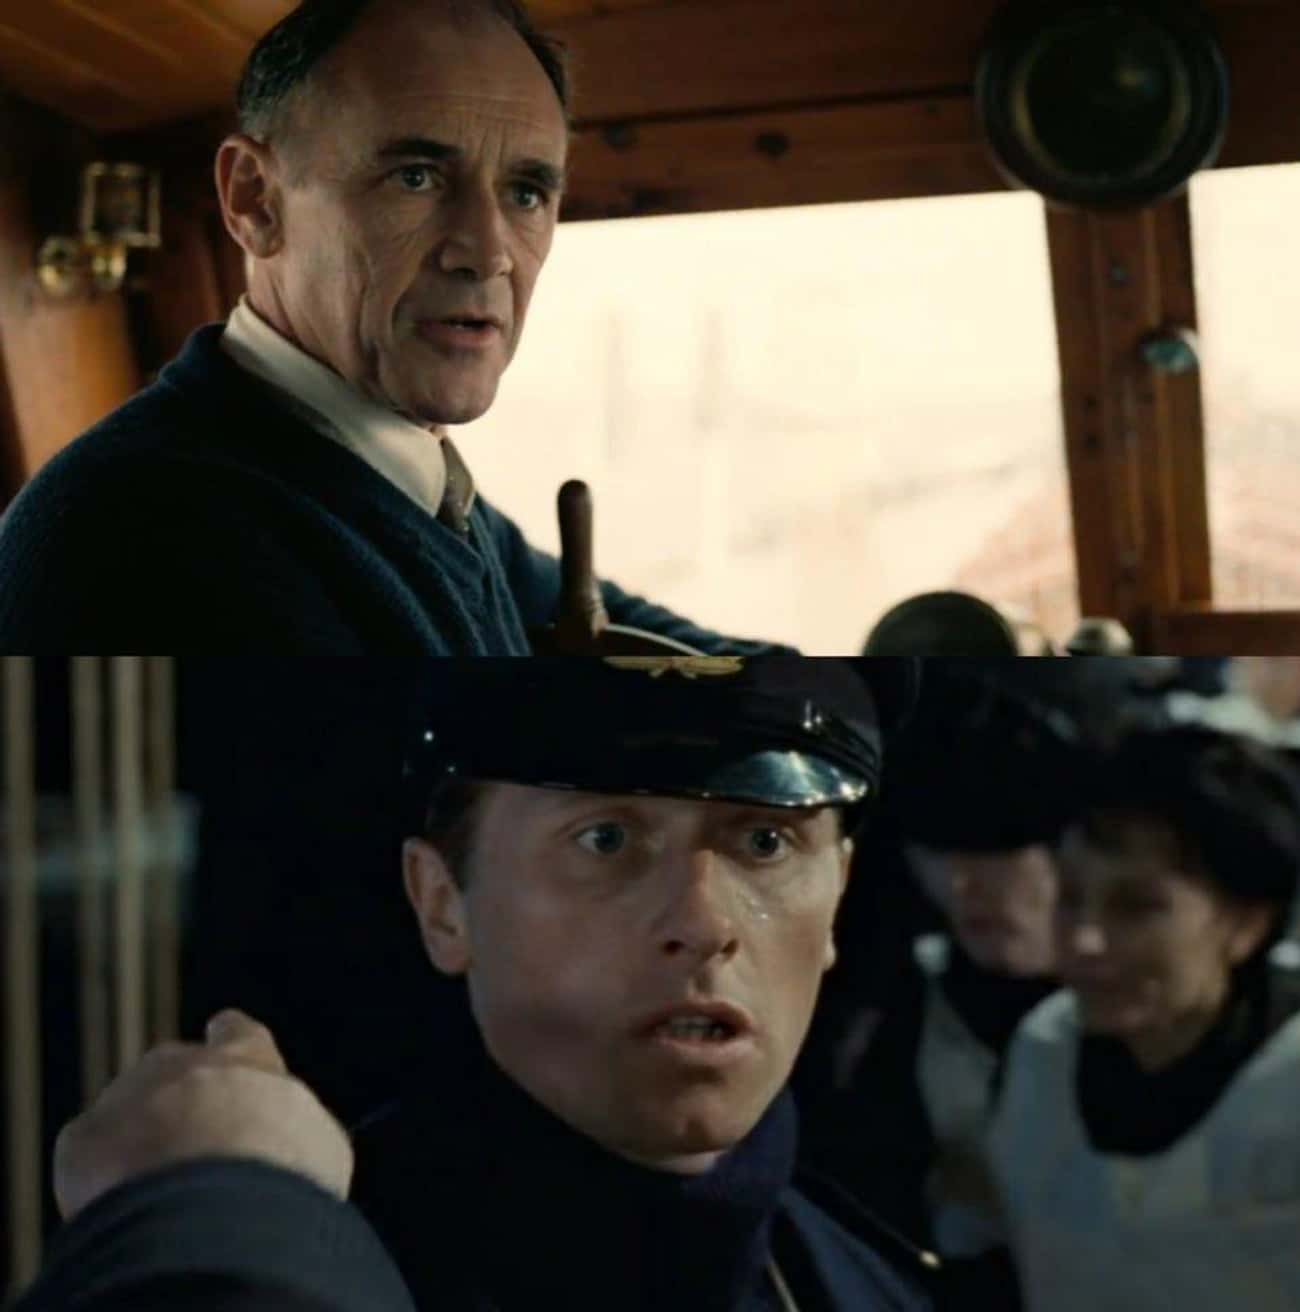 One Of The Officers Onboard The 'Titanic' Went On To Serve In WWI And WWII